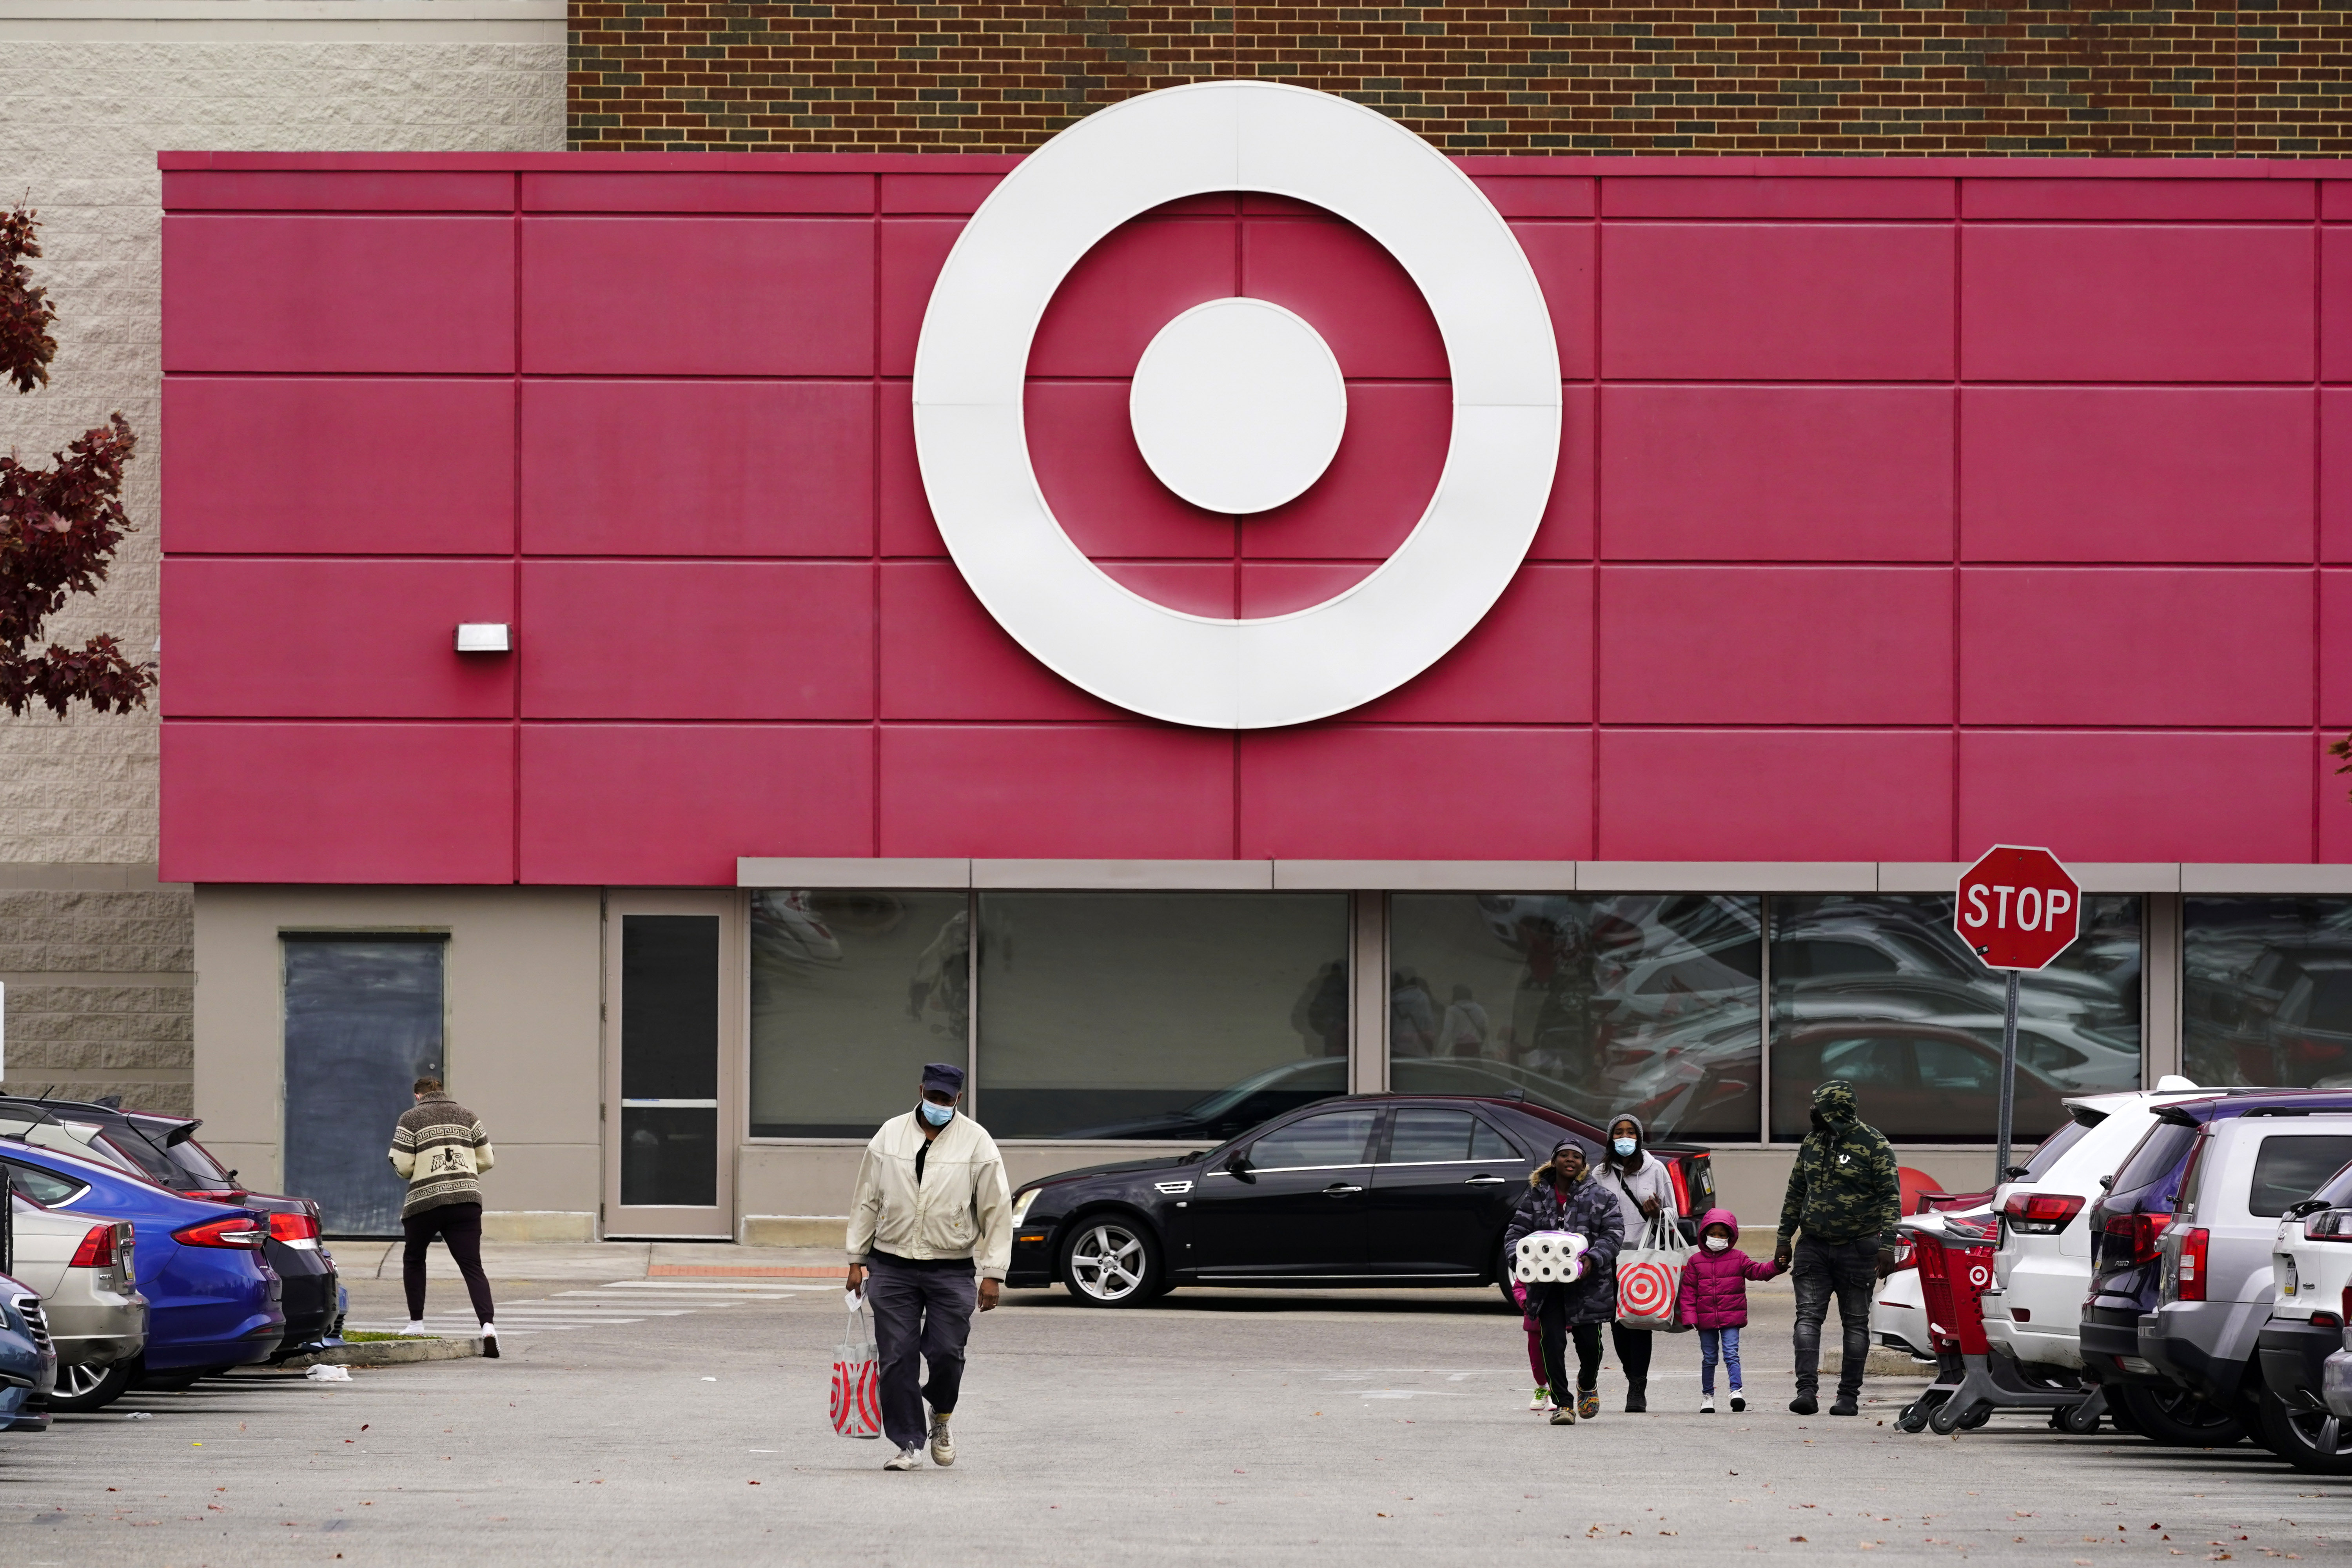 Target Vs Walmart: Which Has Better Deals On Home Goods?